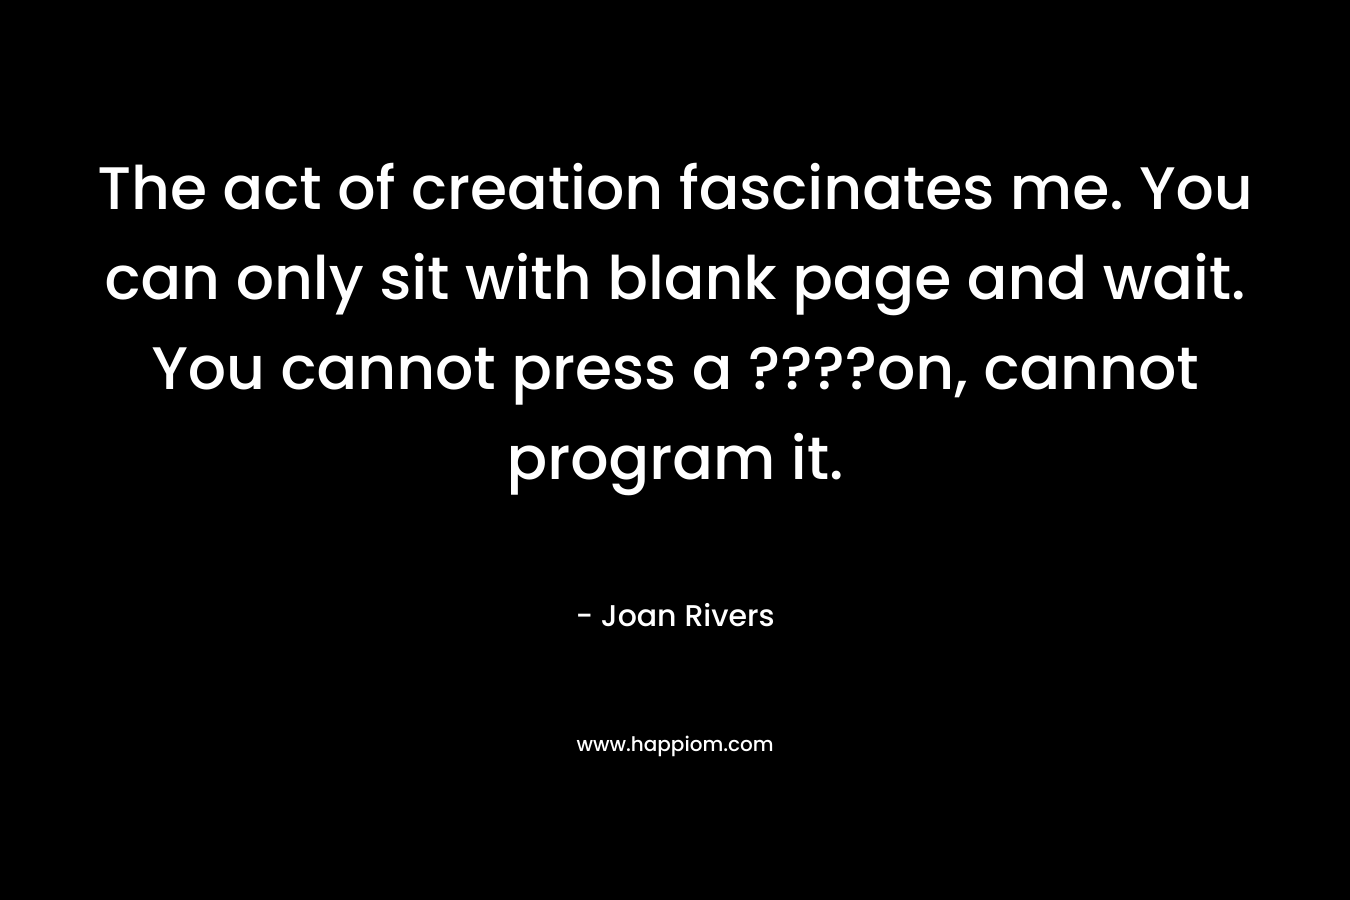 The act of creation fascinates me. You can only sit with blank page and wait. You cannot press a ????on, cannot program it.